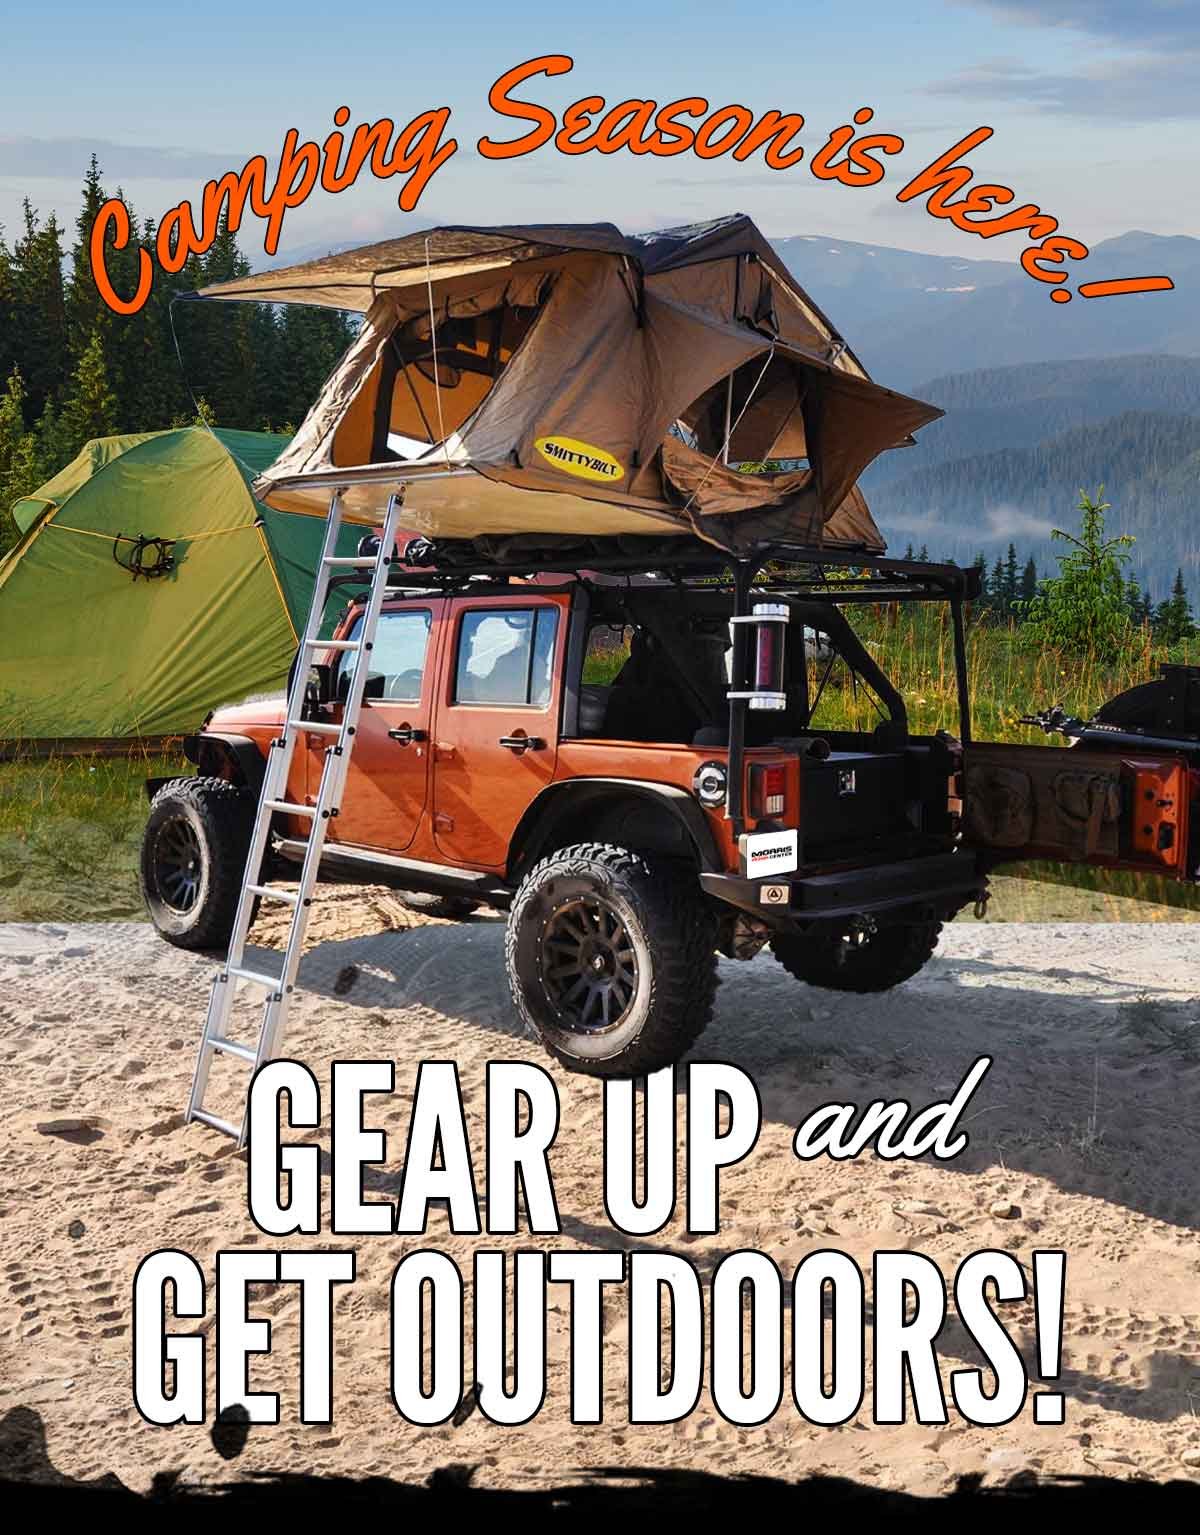 Camping Season Is Here! Gear Up And Get Outdoors!